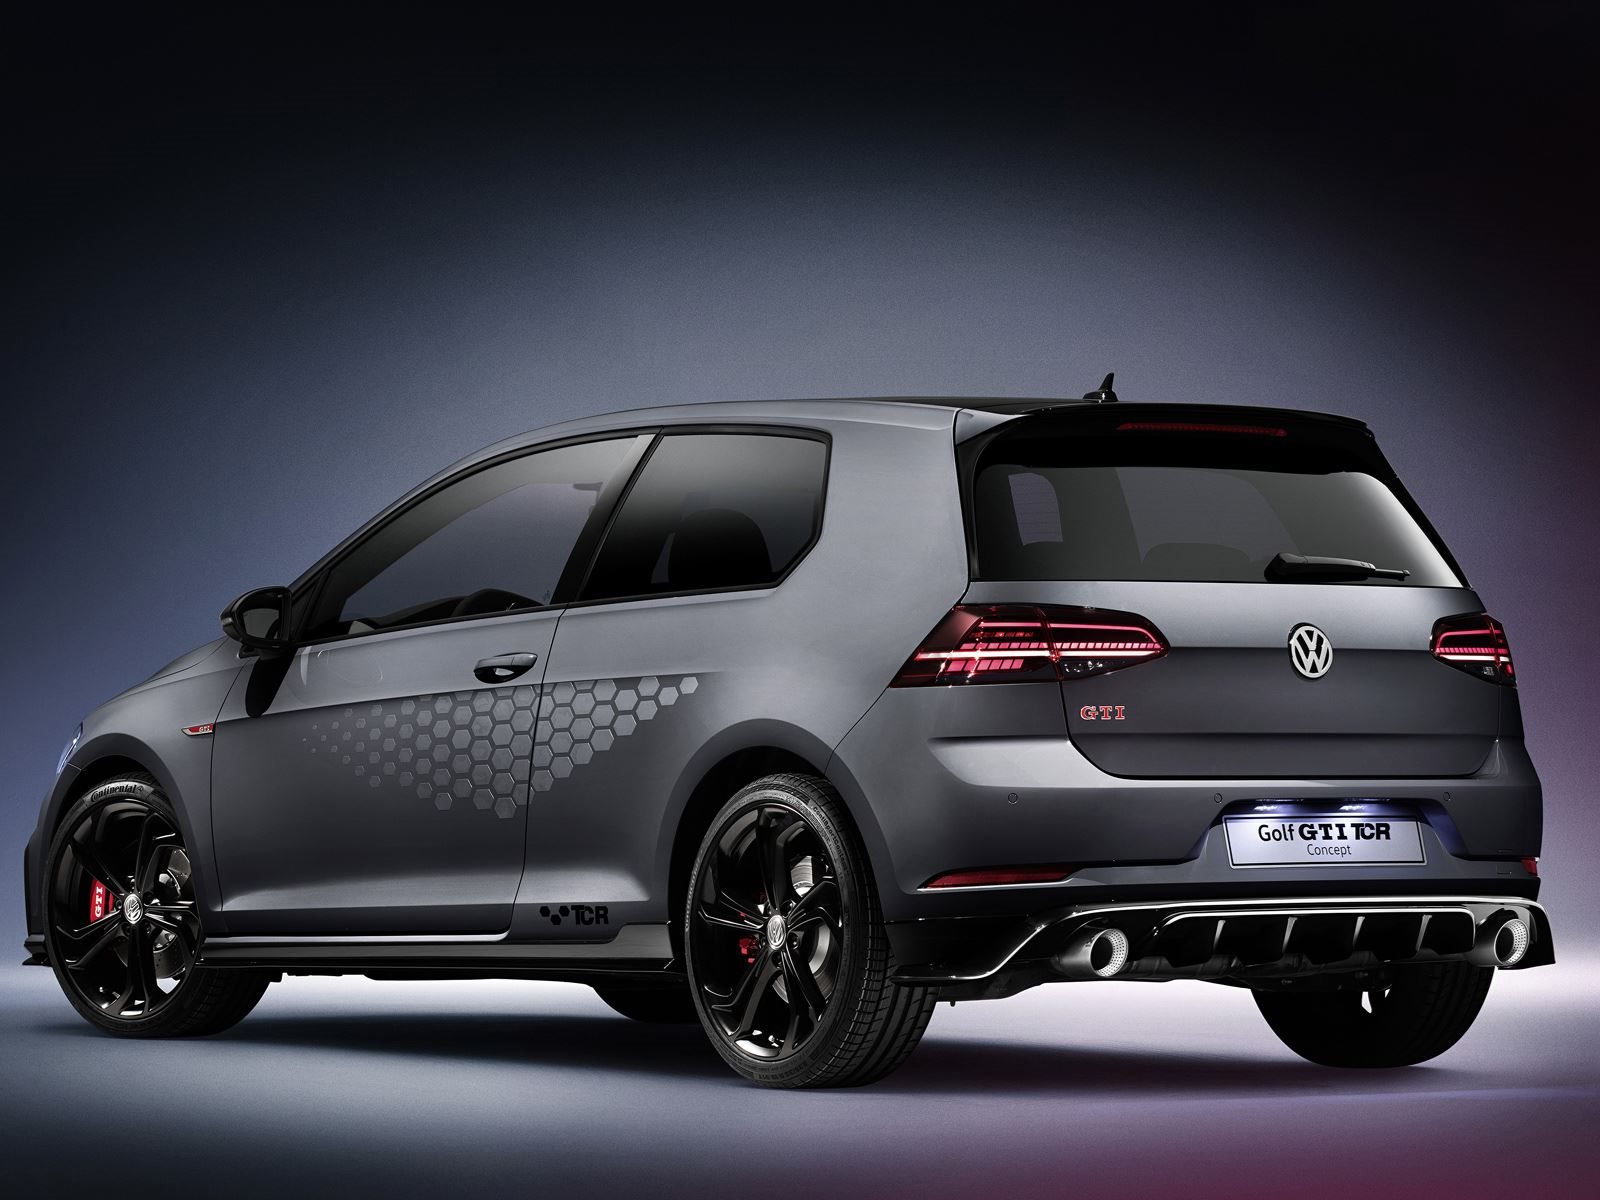 volkswagen-golf-gti-tcr-unveiled-with-race-car-dna-carbuzz